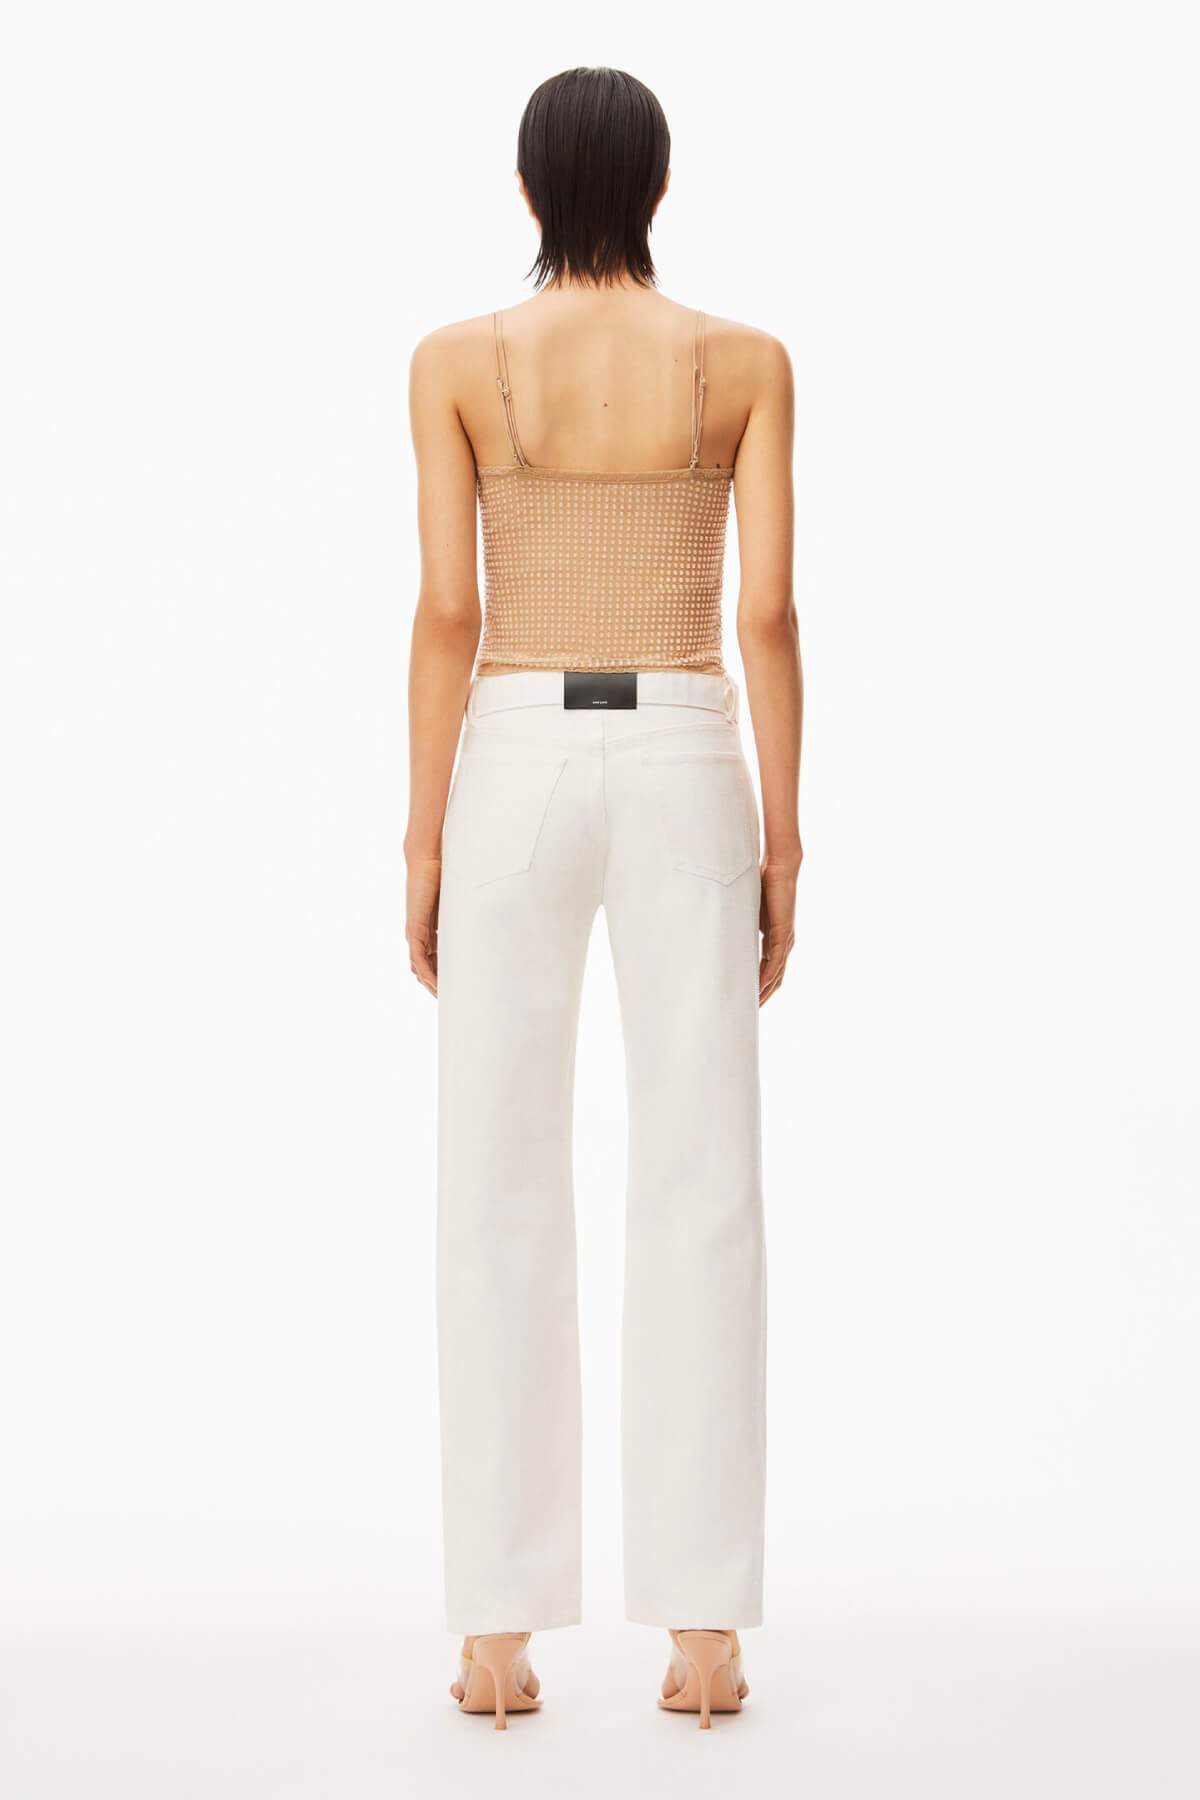 Alexander Wang Clear Hotfix Camisole - Ginger